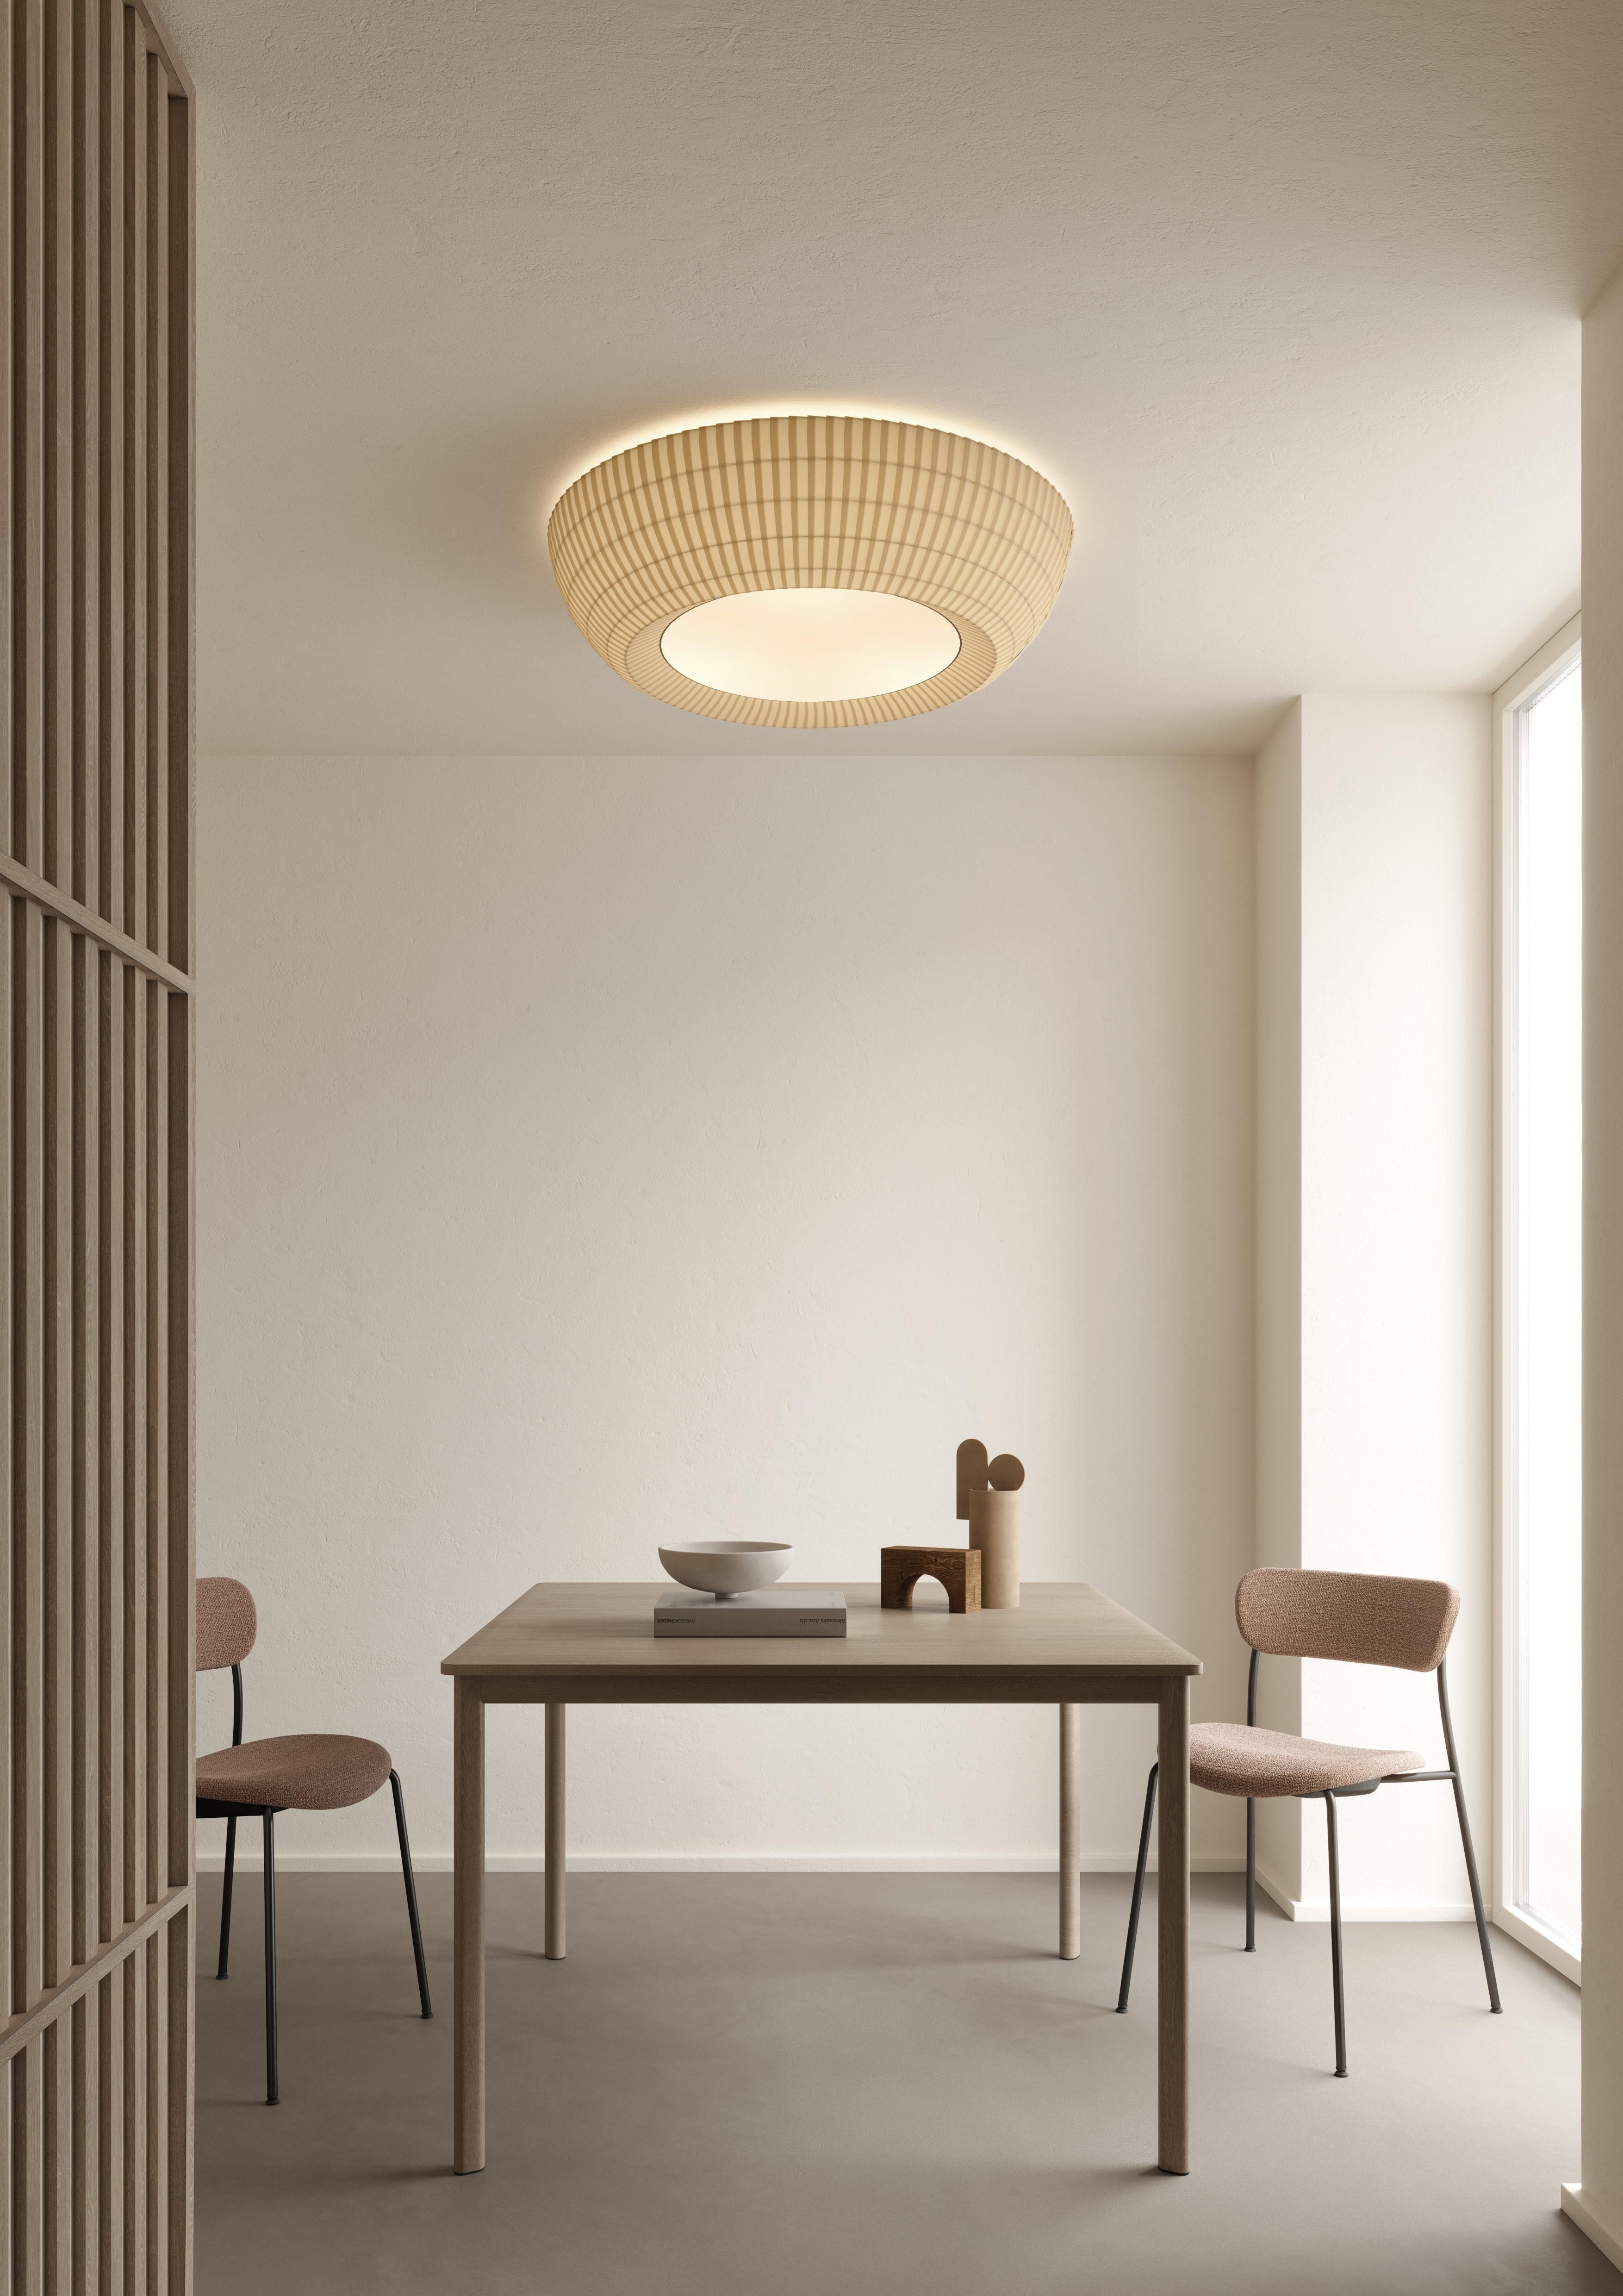 Axolight Bell Large Flush Mount/ Ceiling Lamp in Yellow by Manuel & Vanessa Vivian

The ceiling version of Bell is in continuity with the aesthetic of the pendant one. The lightness given by the fabric, the multidimensionality and the chromatic